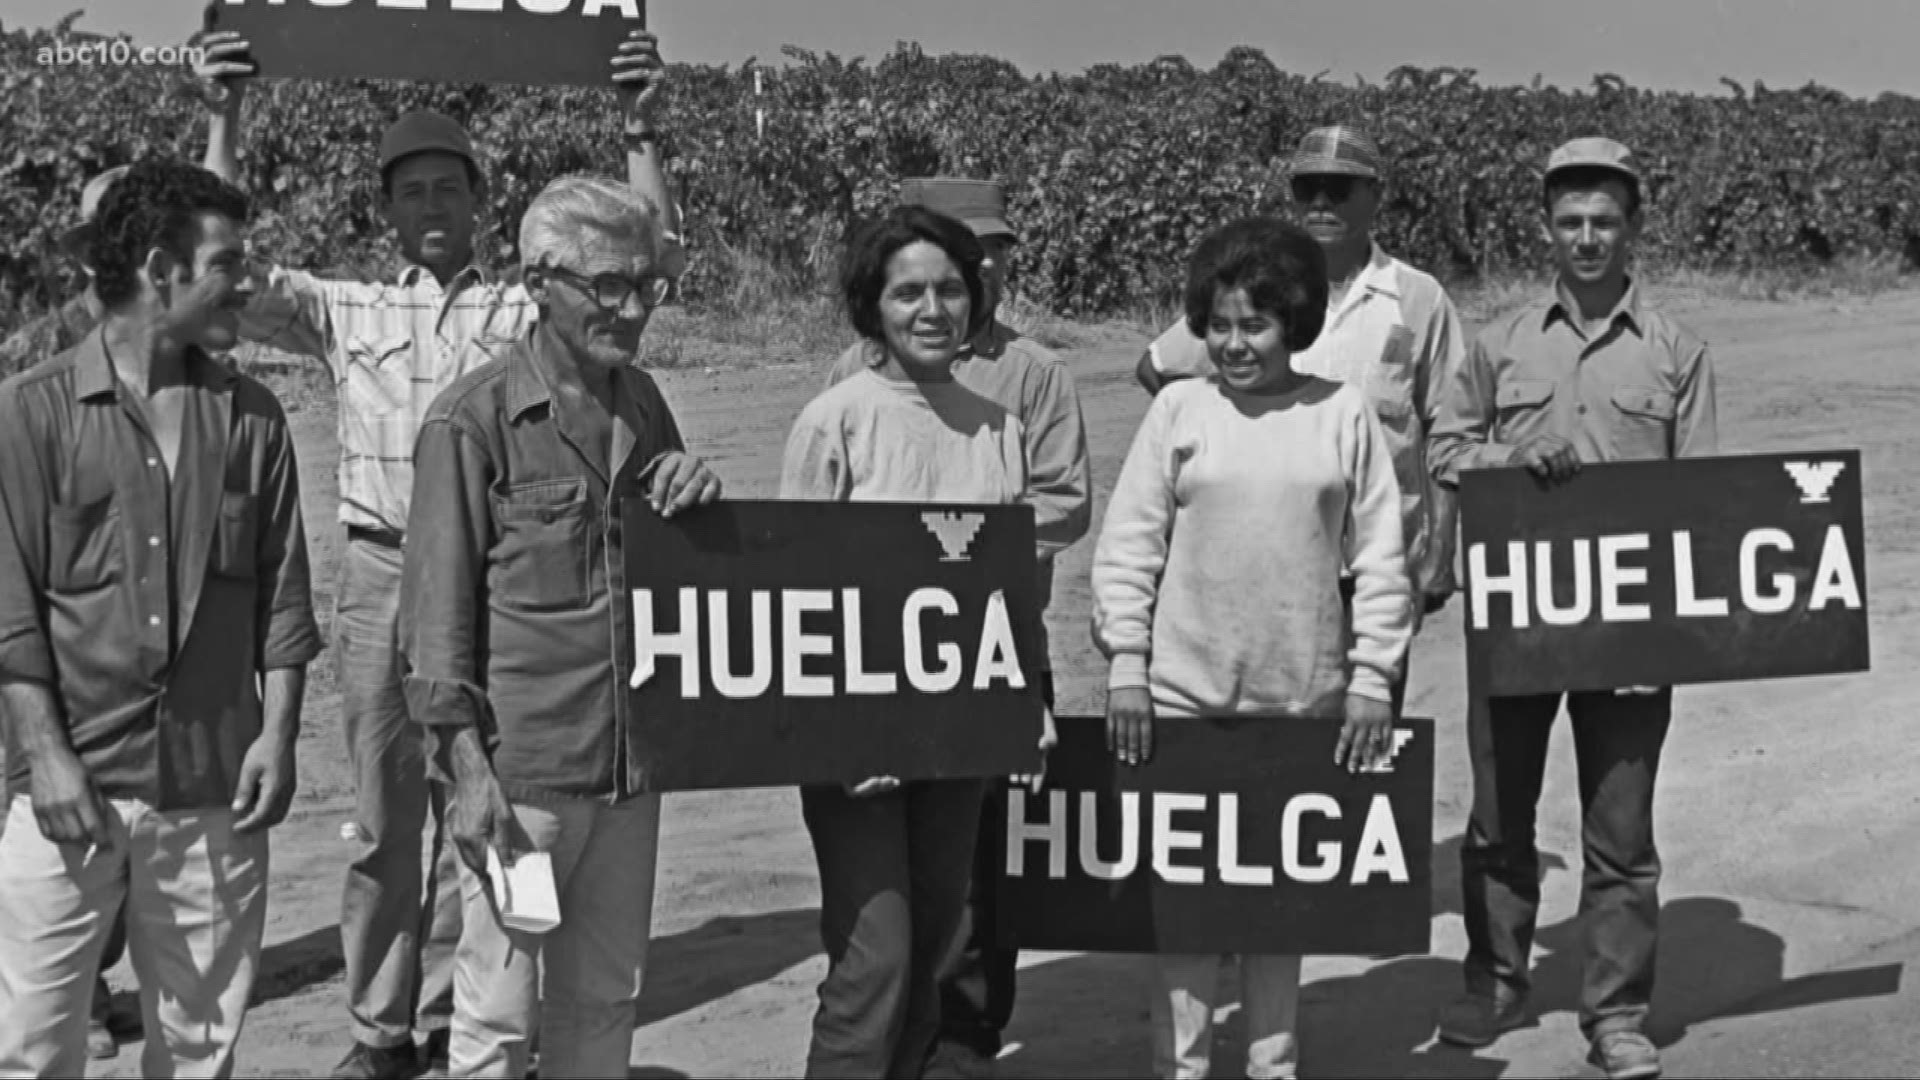 The official unveiling of Dolores Huerta Plaza will happen Thursday at 12:30 p.m. The event is free and open to the public.